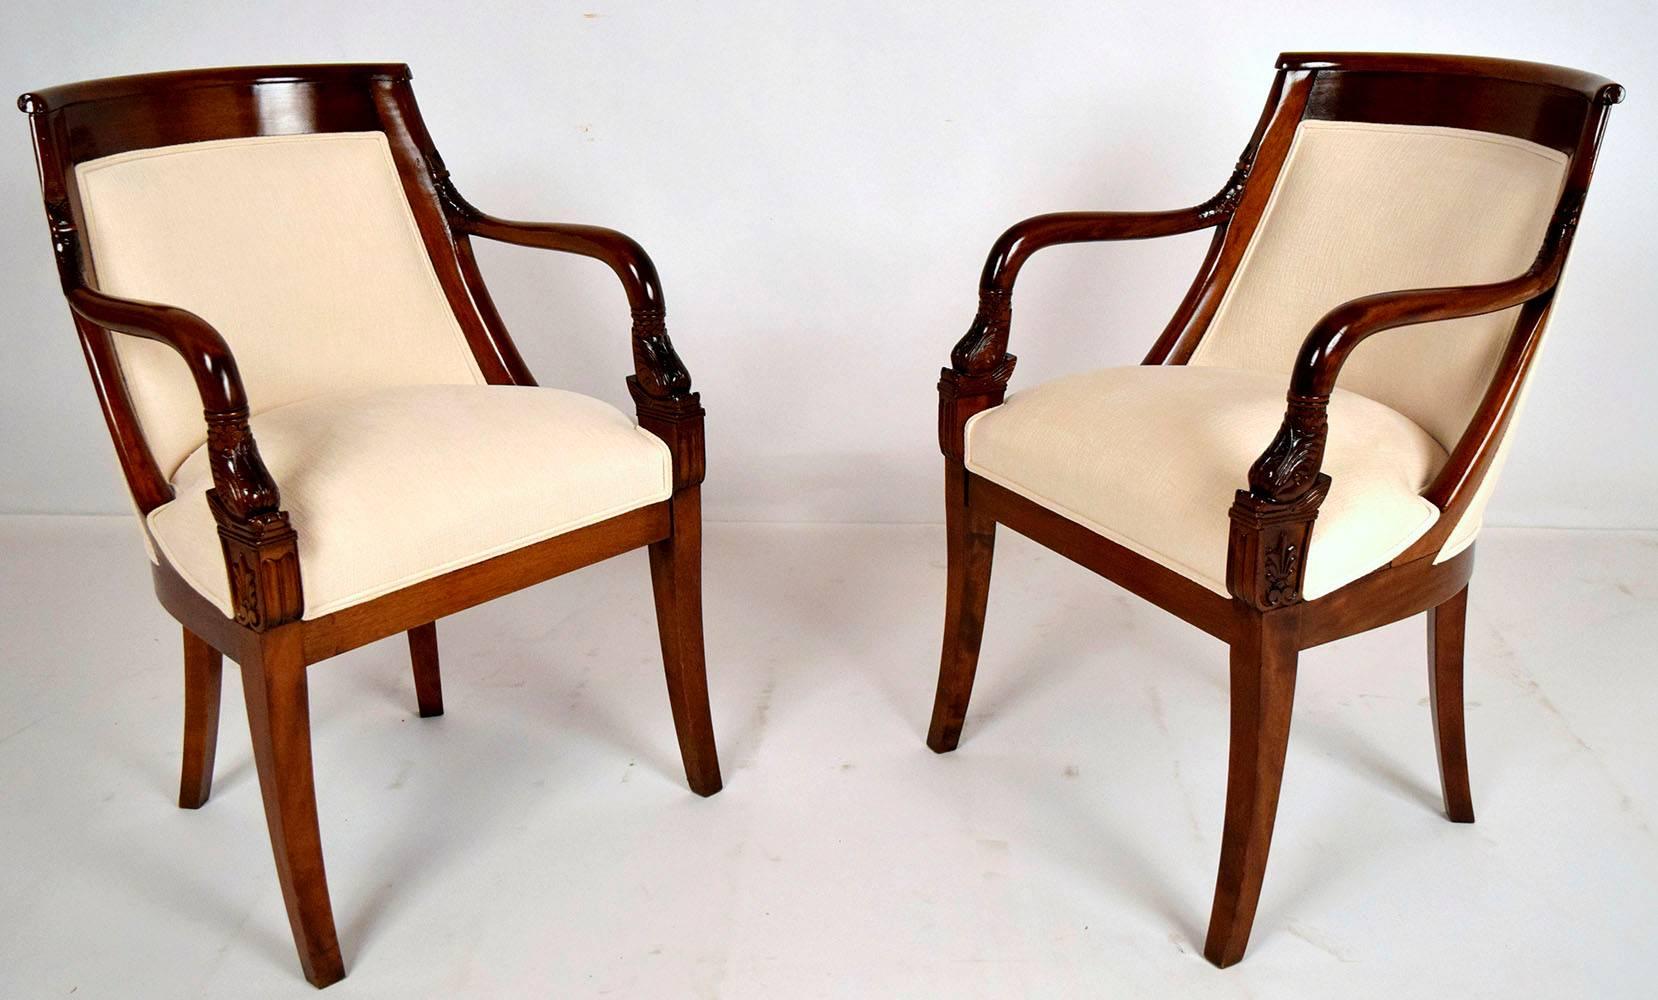 Beautiful set of eight, 1900s dining chairs Empire style set has two armchairs and six side chairs. Solid gondola mahogany wood frames, finished in a rich dark mahogany. All chairs have curved backs, and the two armchairs have carved arms. All eight